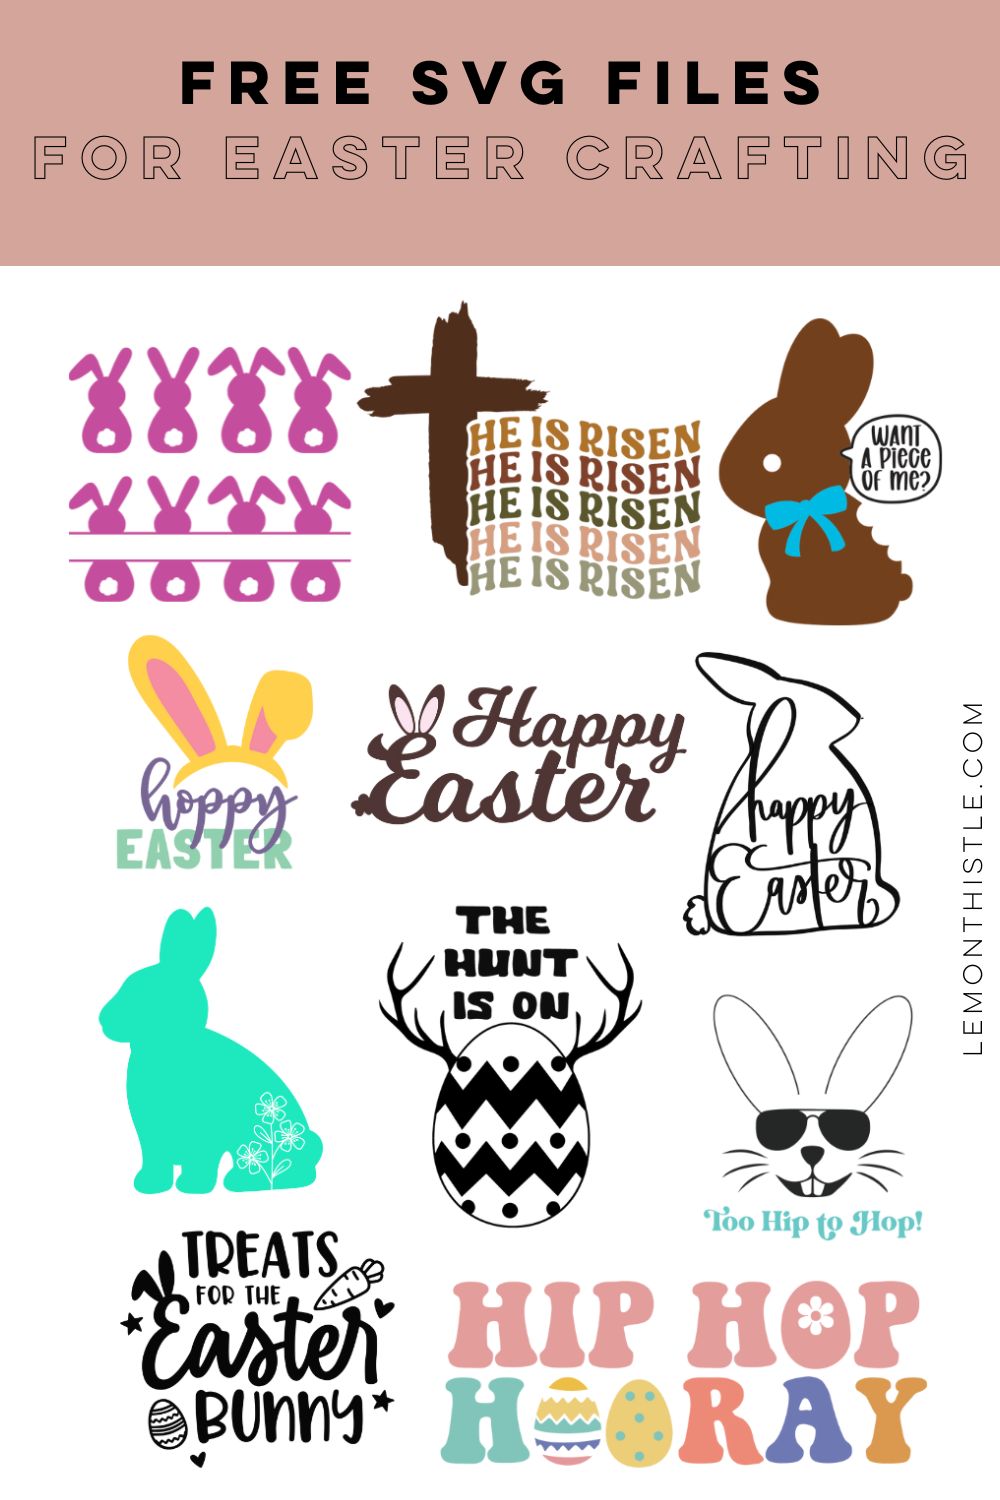 12 Free SVG Files for Easter (collage of designs with title at top)